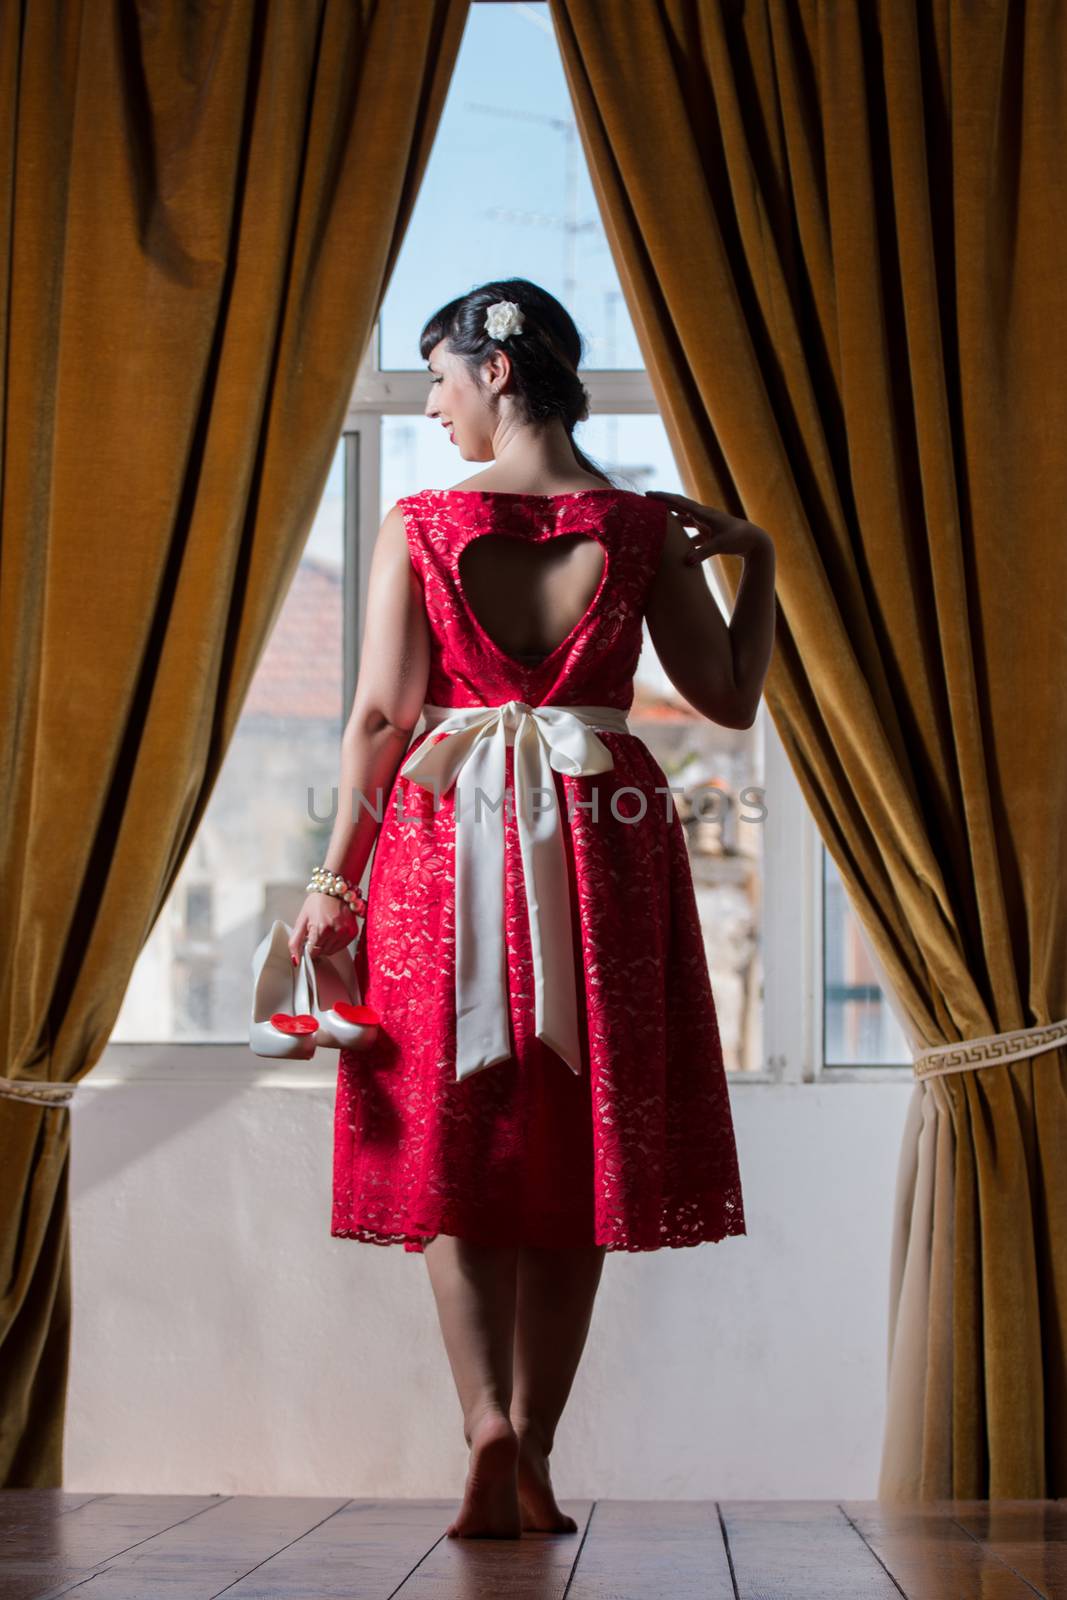 Pinup girl with red dress next to a classic window.